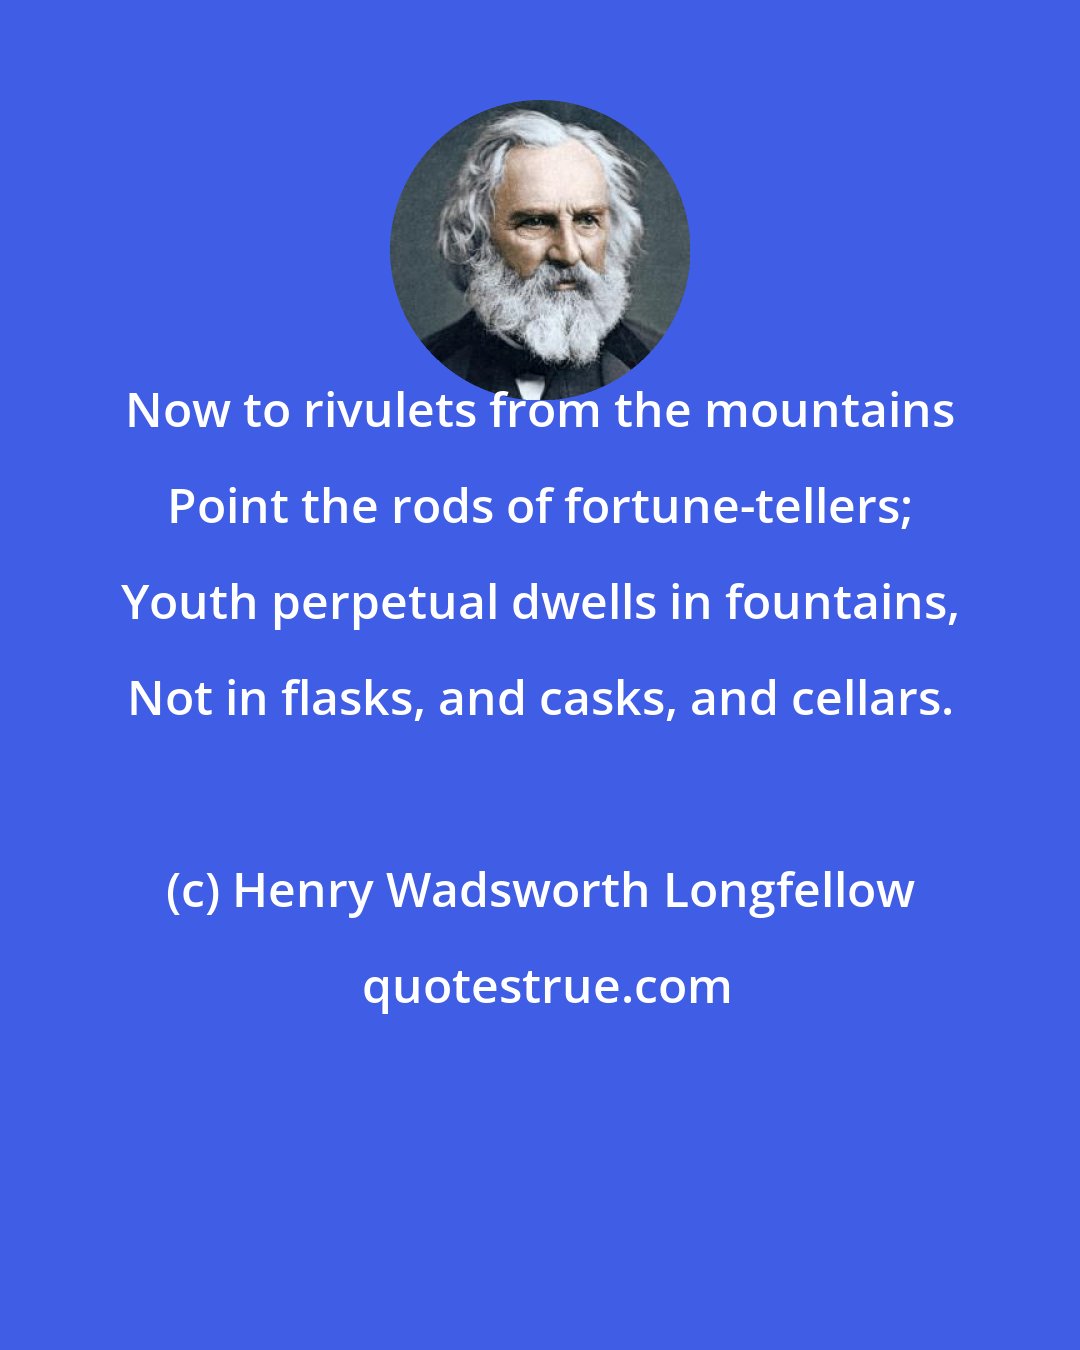 Henry Wadsworth Longfellow: Now to rivulets from the mountains Point the rods of fortune-tellers; Youth perpetual dwells in fountains, Not in flasks, and casks, and cellars.